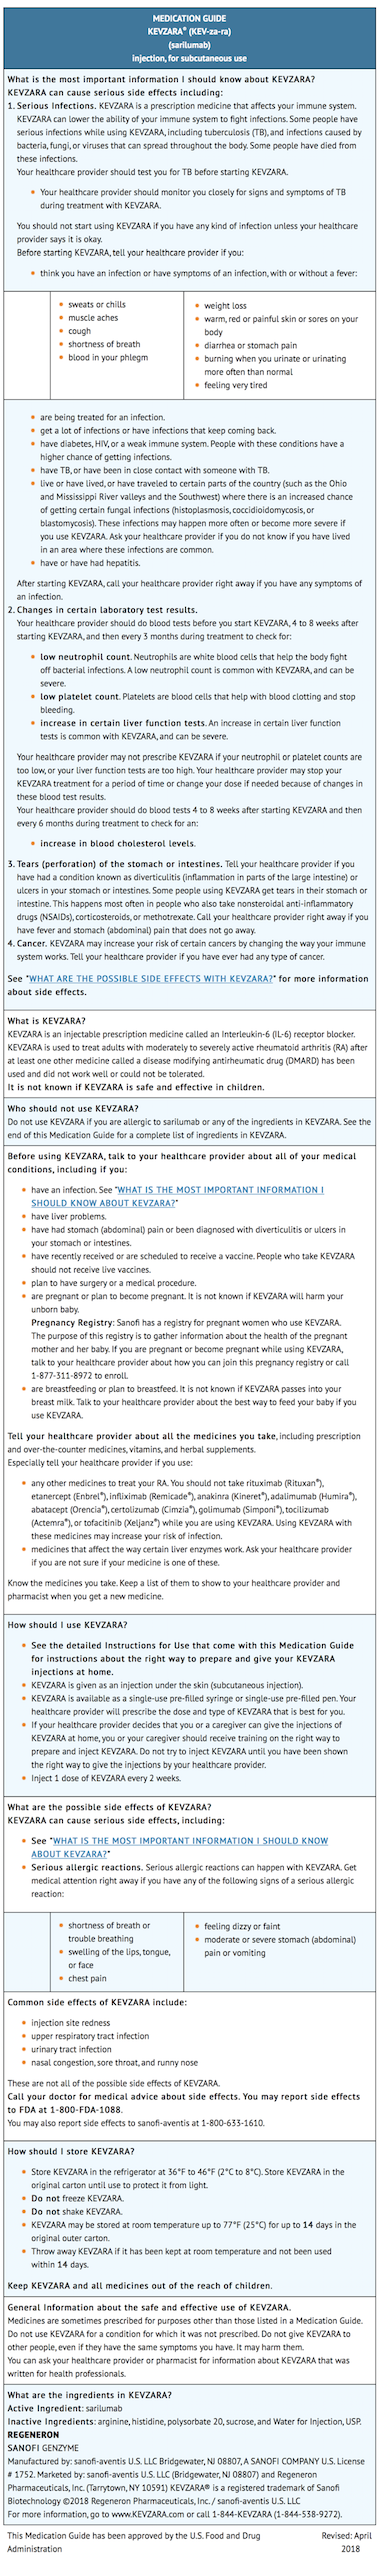 File:Kevzara Patient Counseling Information.png